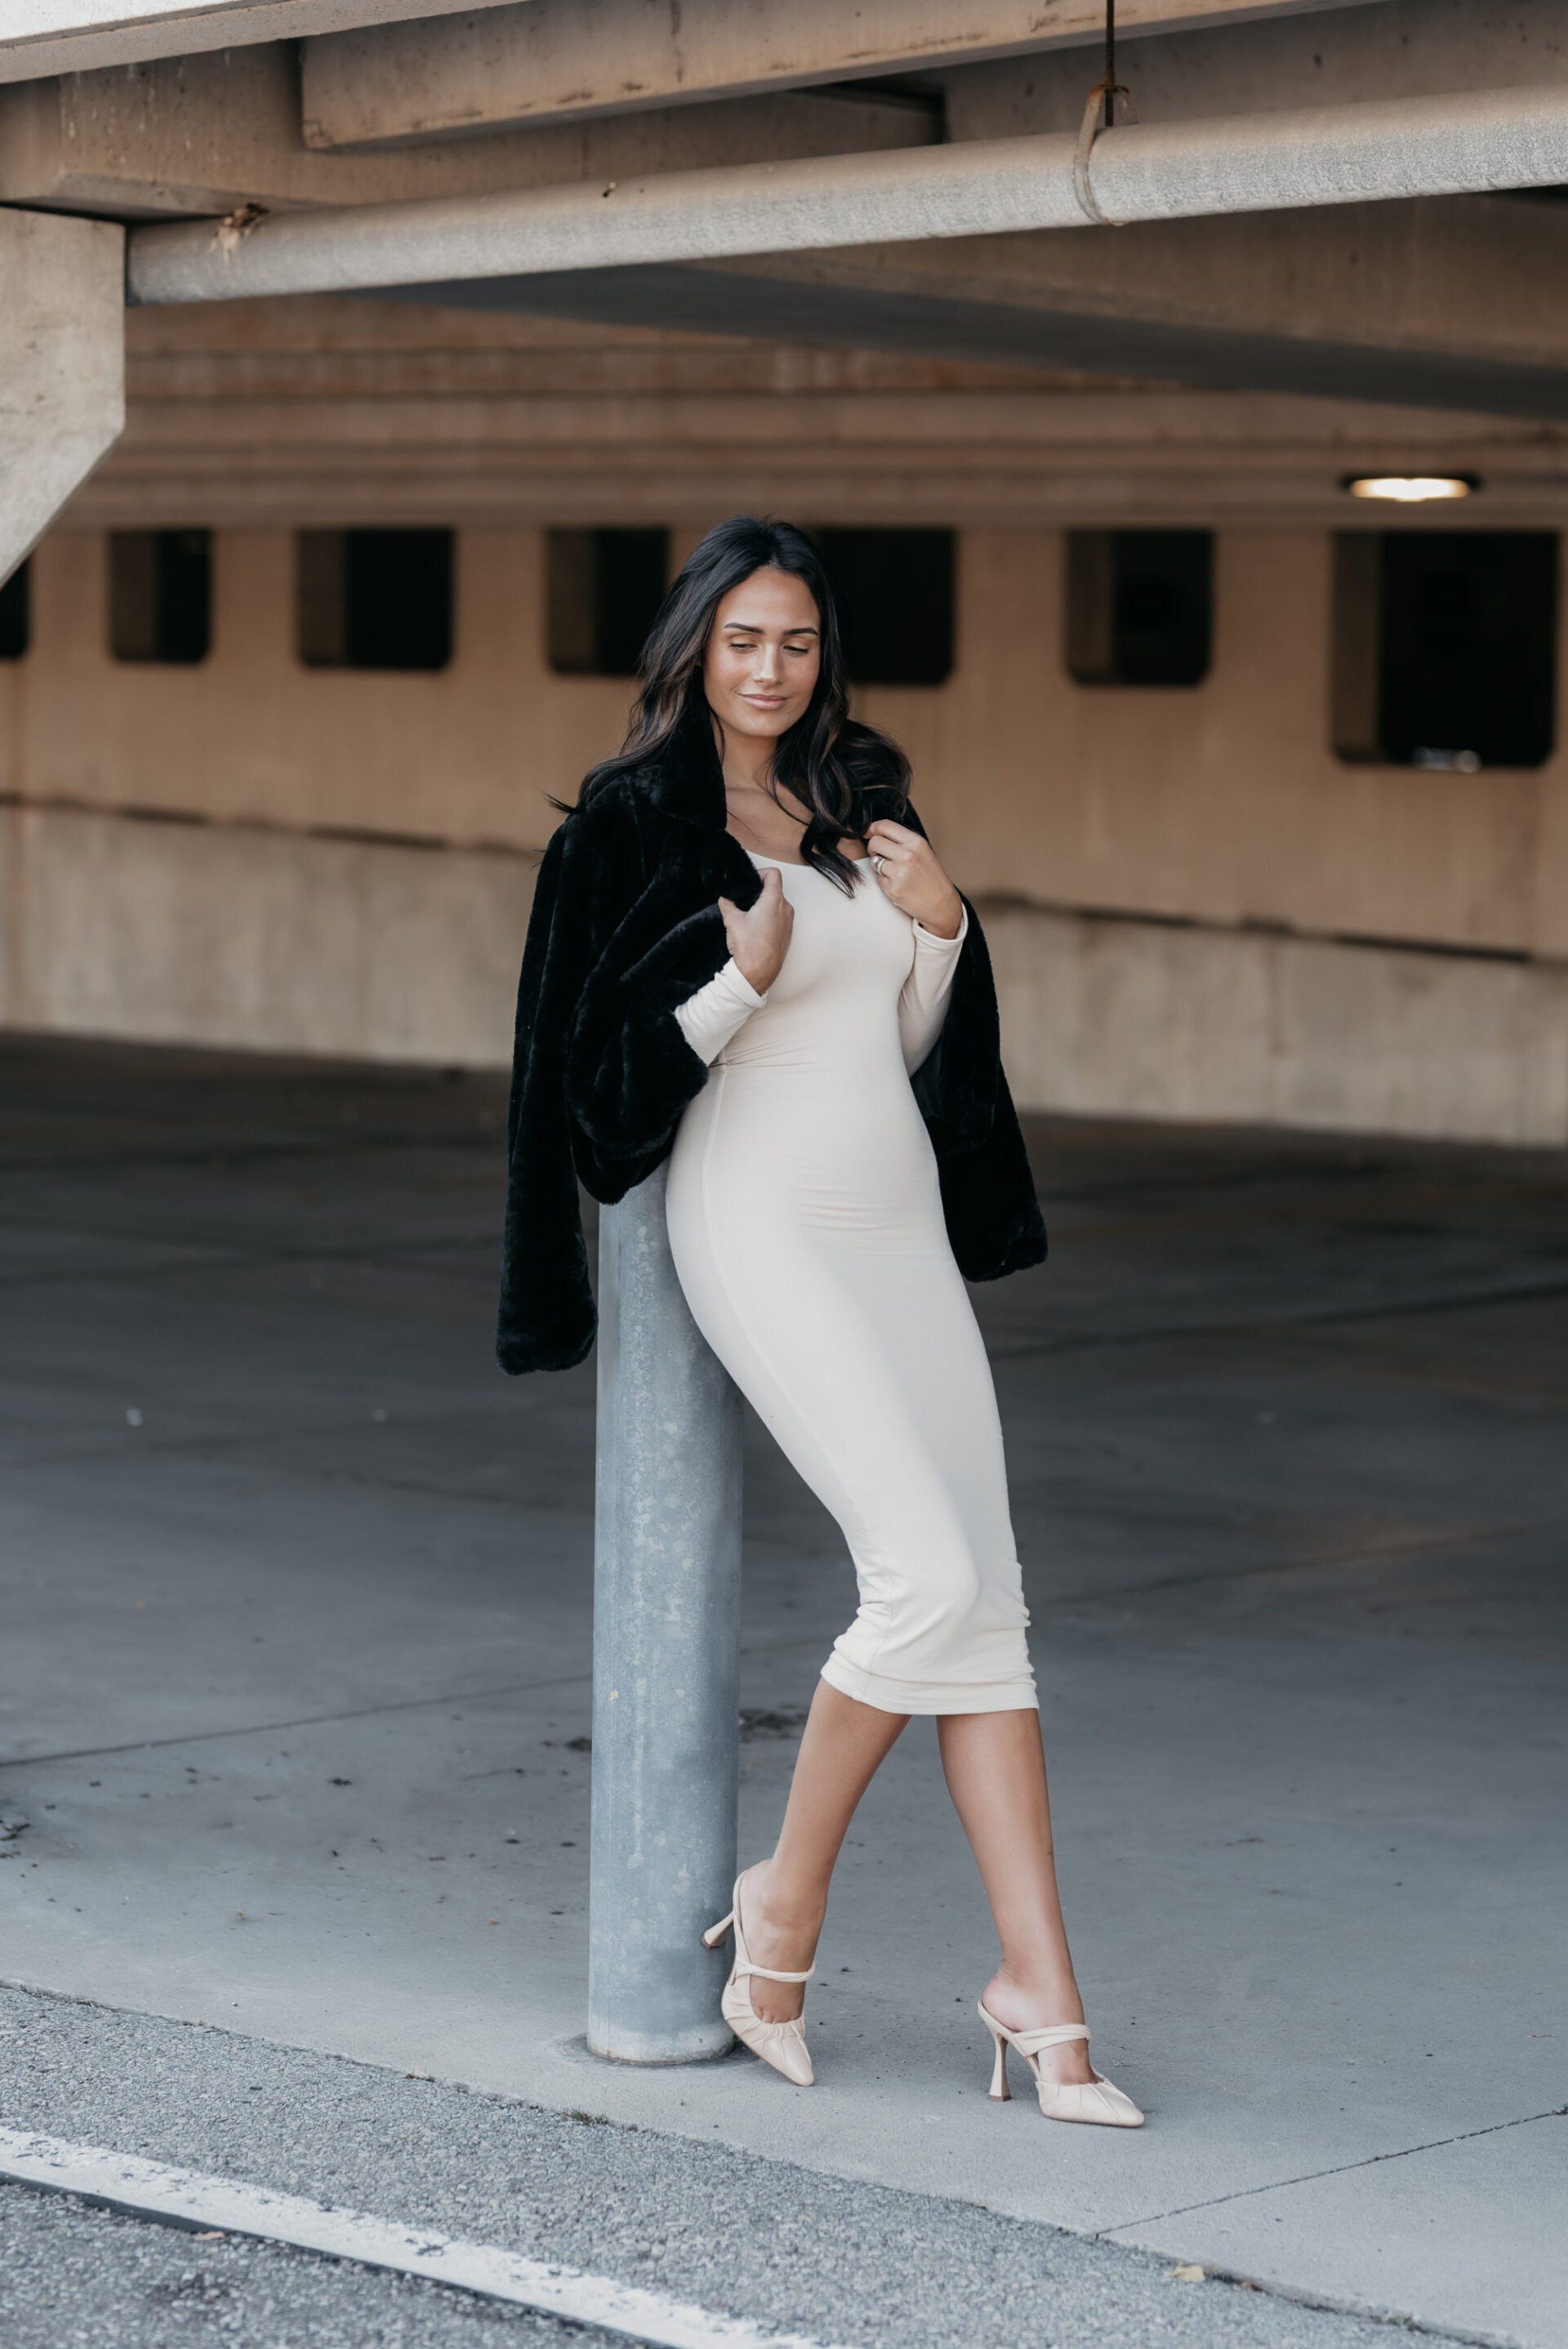 Social influencer Chantel in a white dress and black jacket